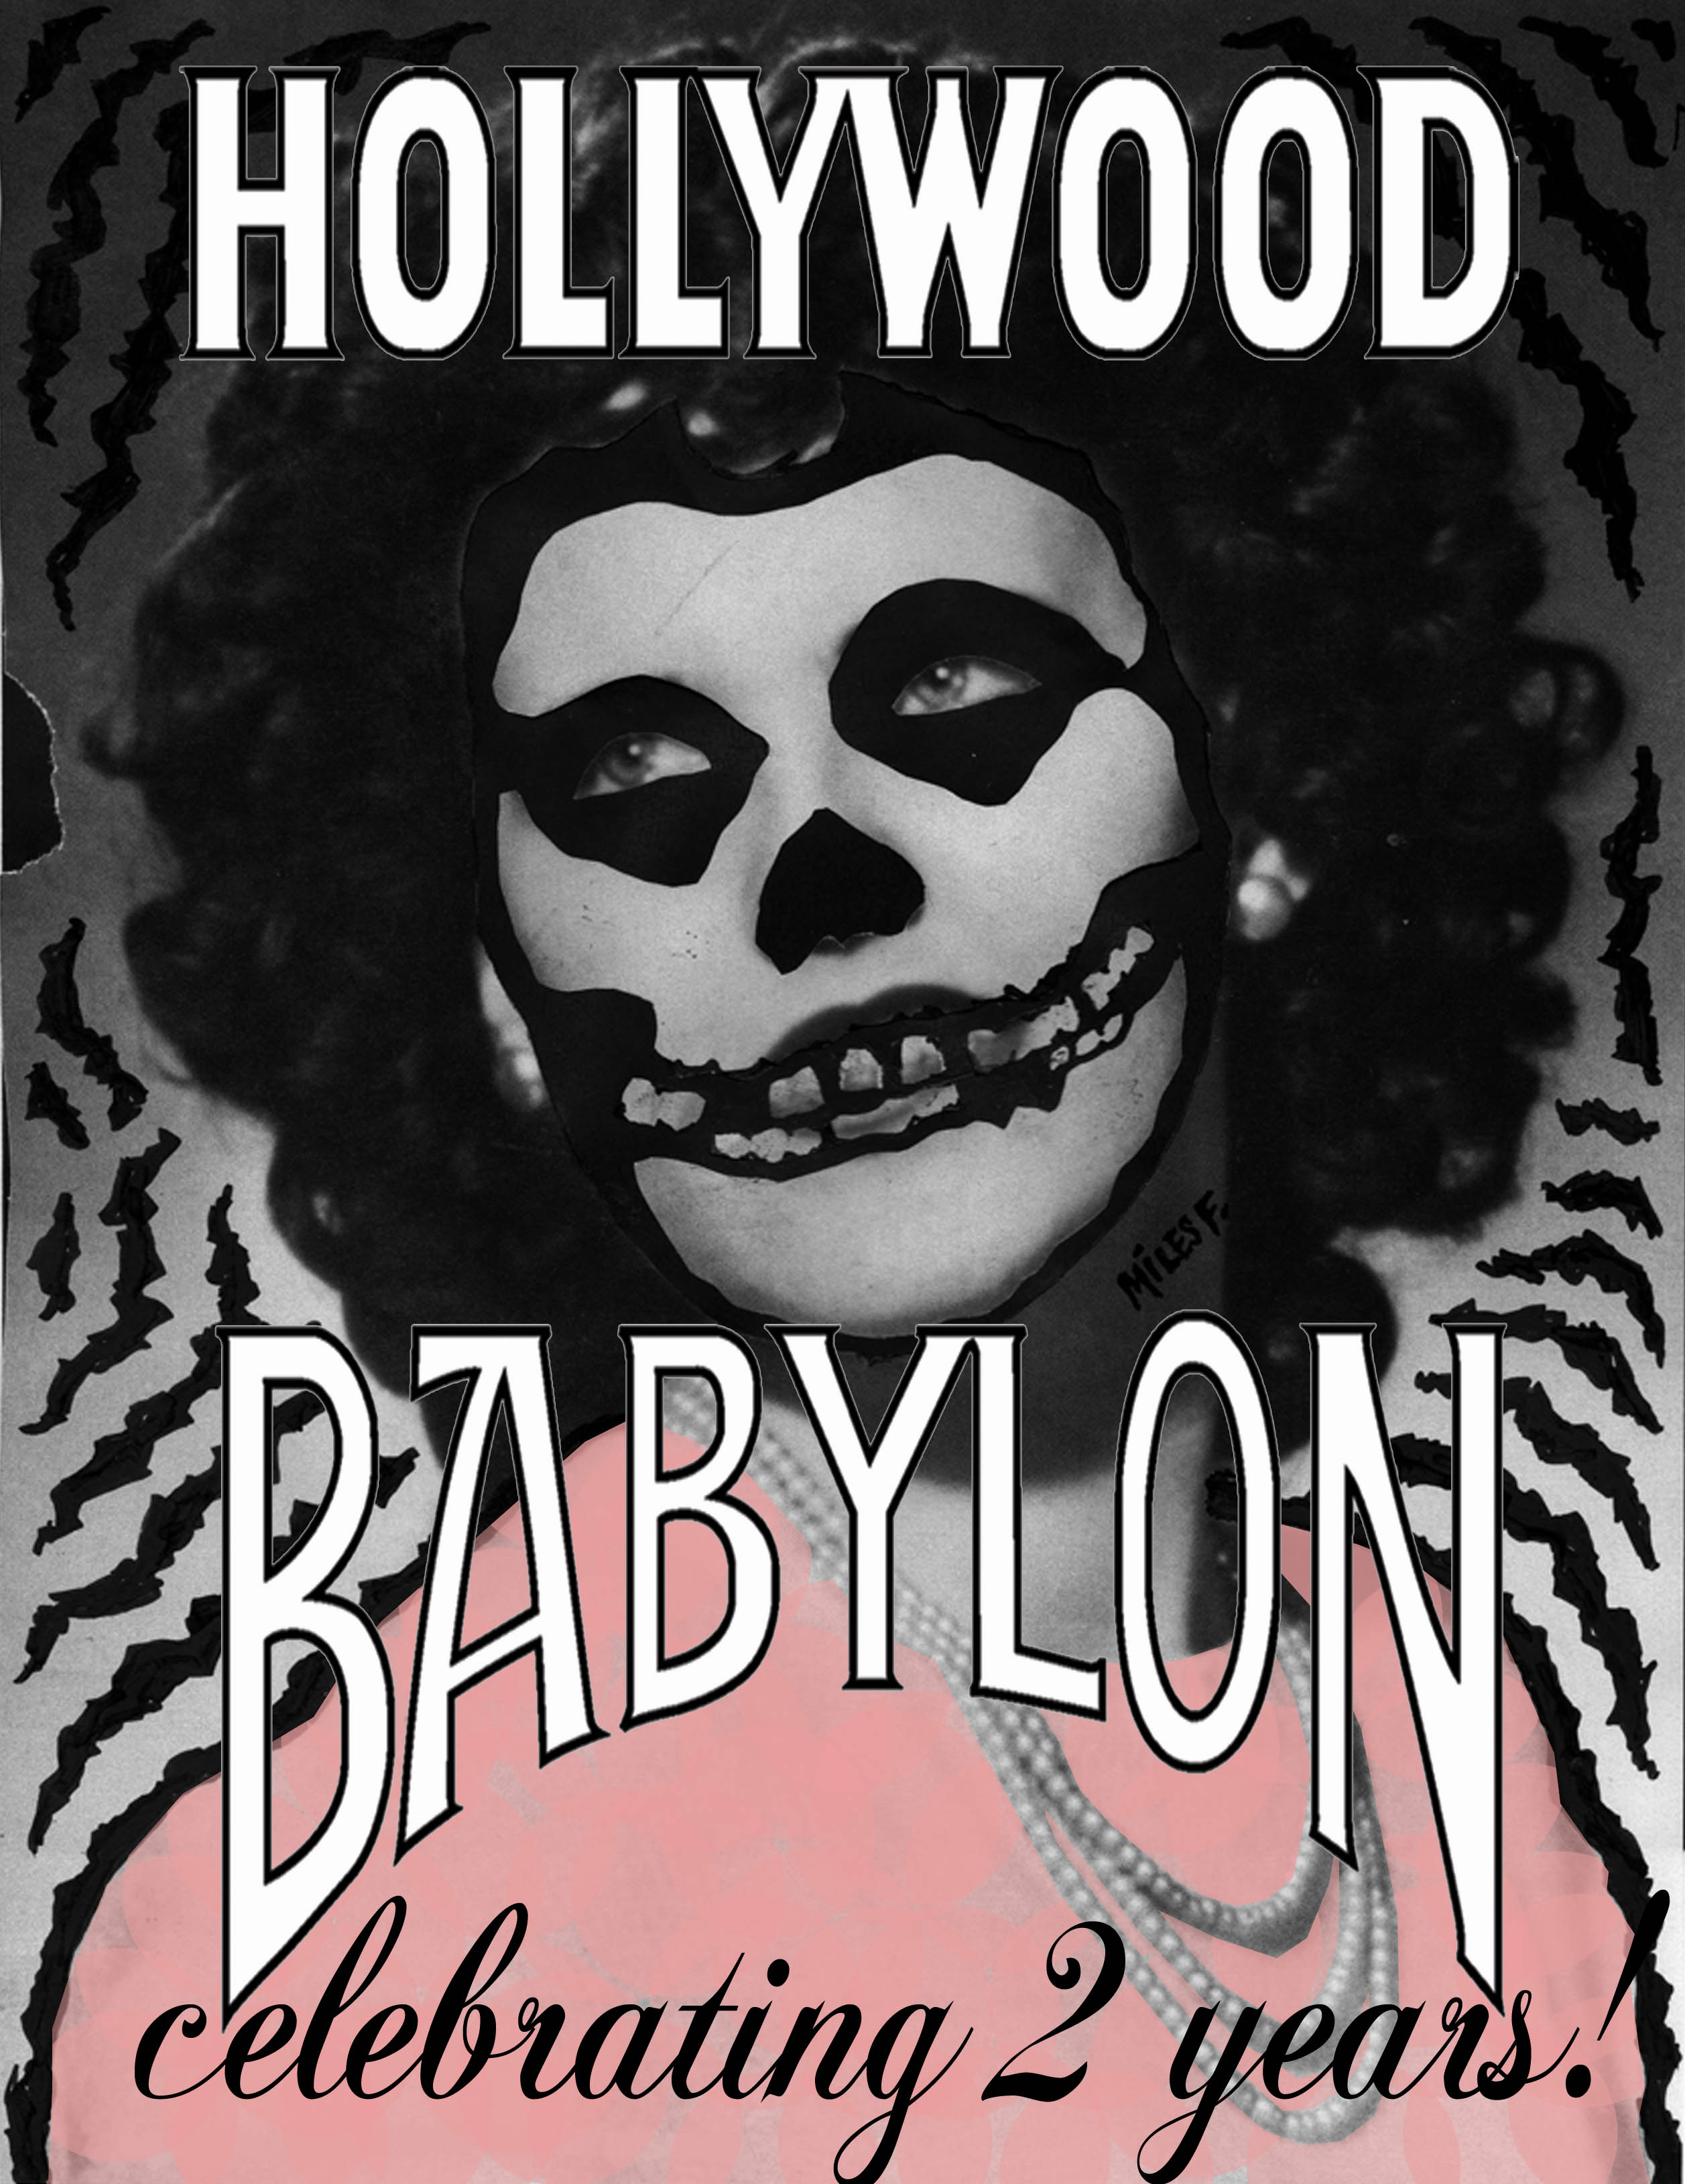 save the date: january 19th - hollywood babylon turns 2!